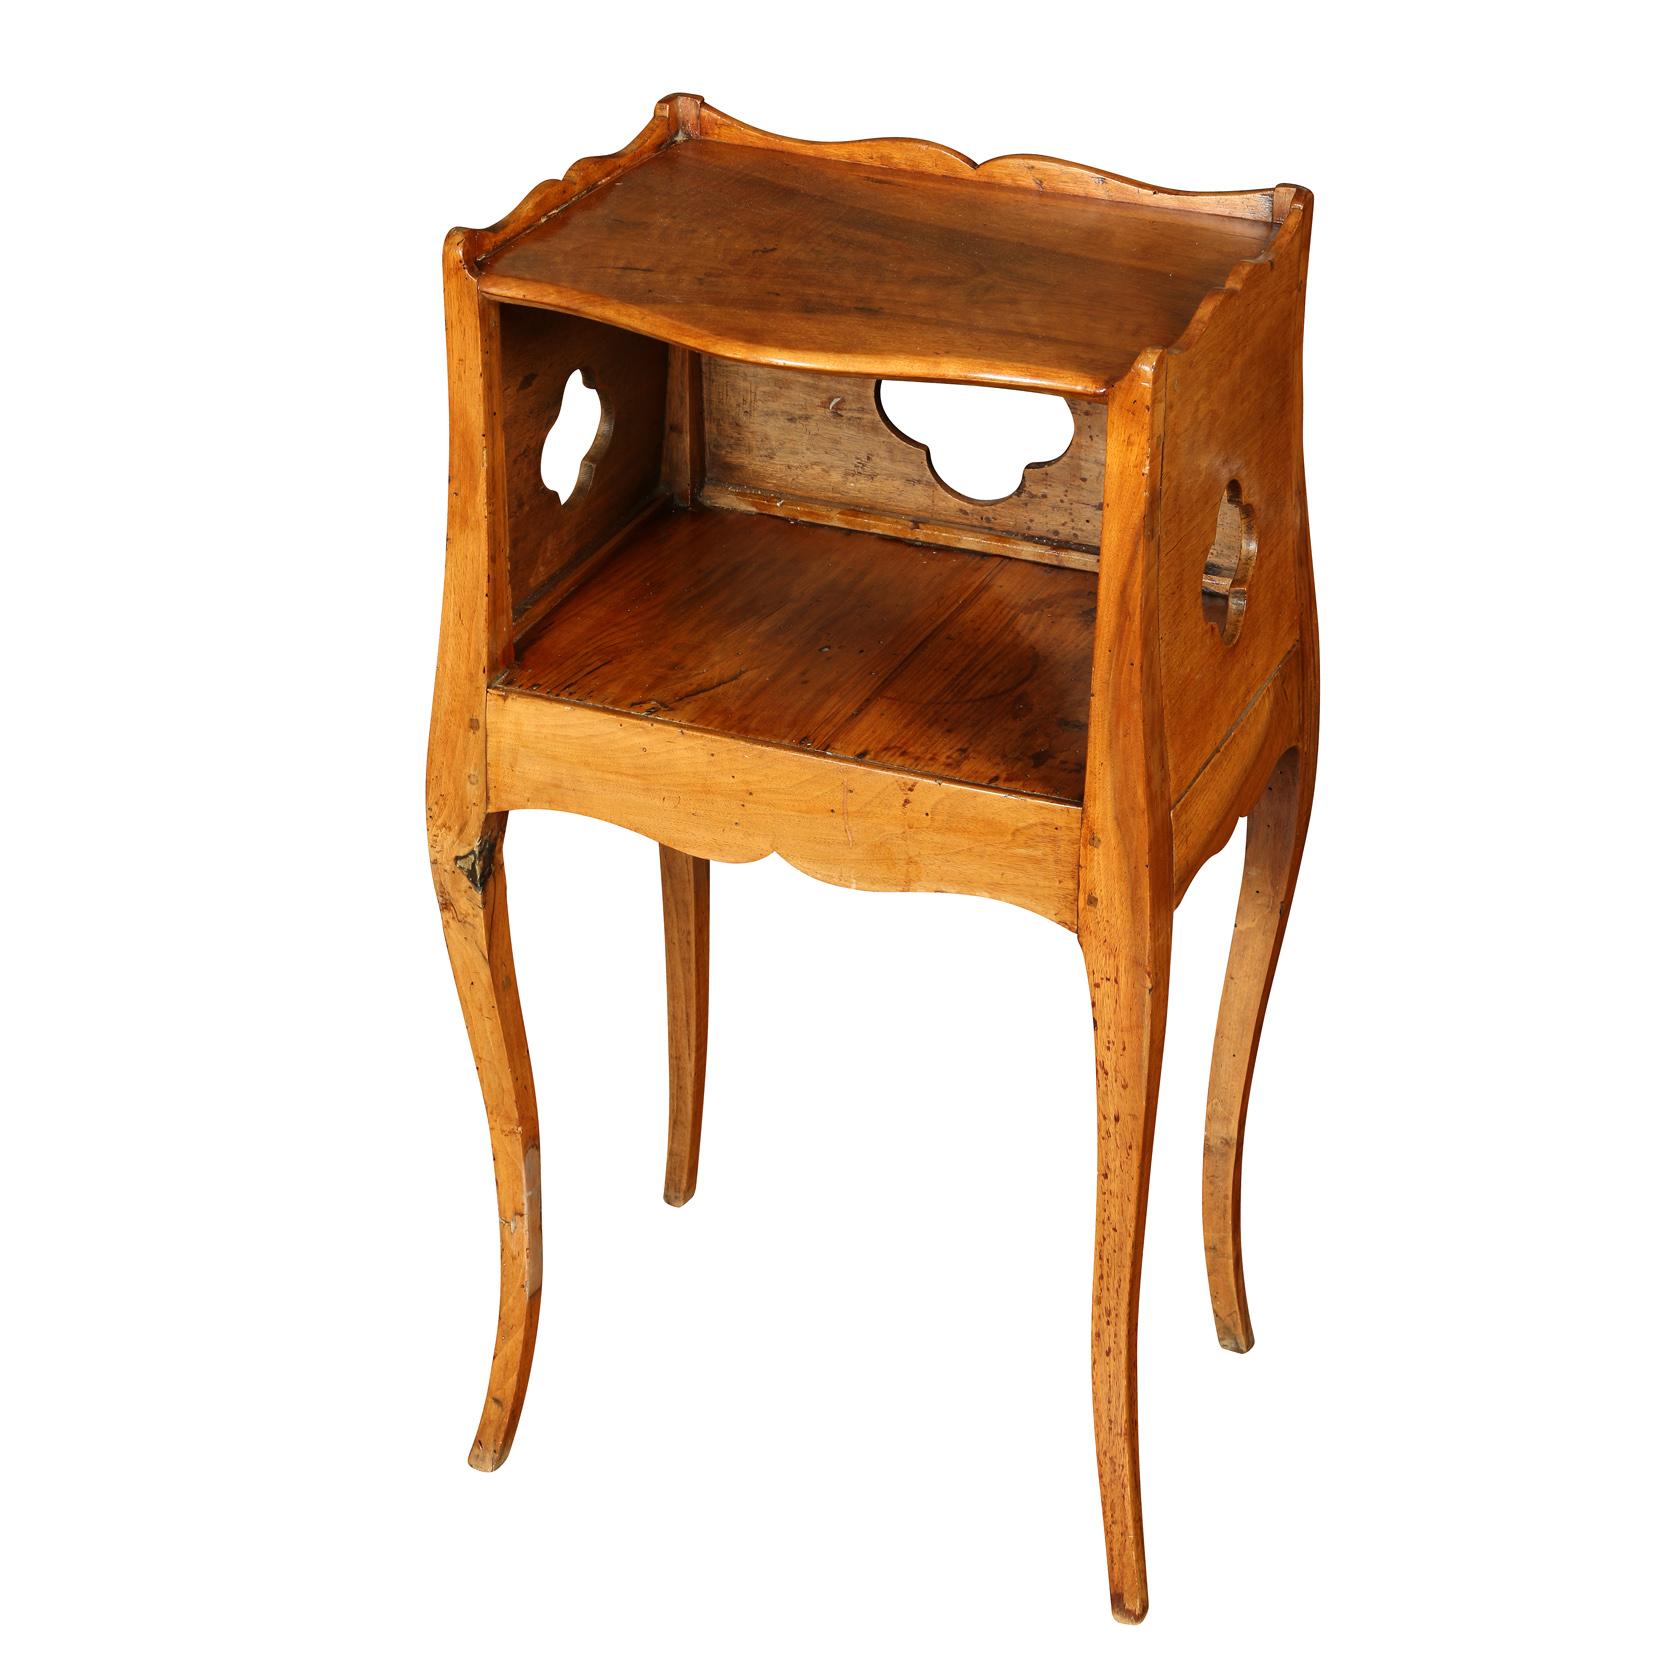 An almost pair of French fruitwood antique nightstands with an open cubby and cabriole legs, one slightly larger with quatrefoil cutouts on three sides.